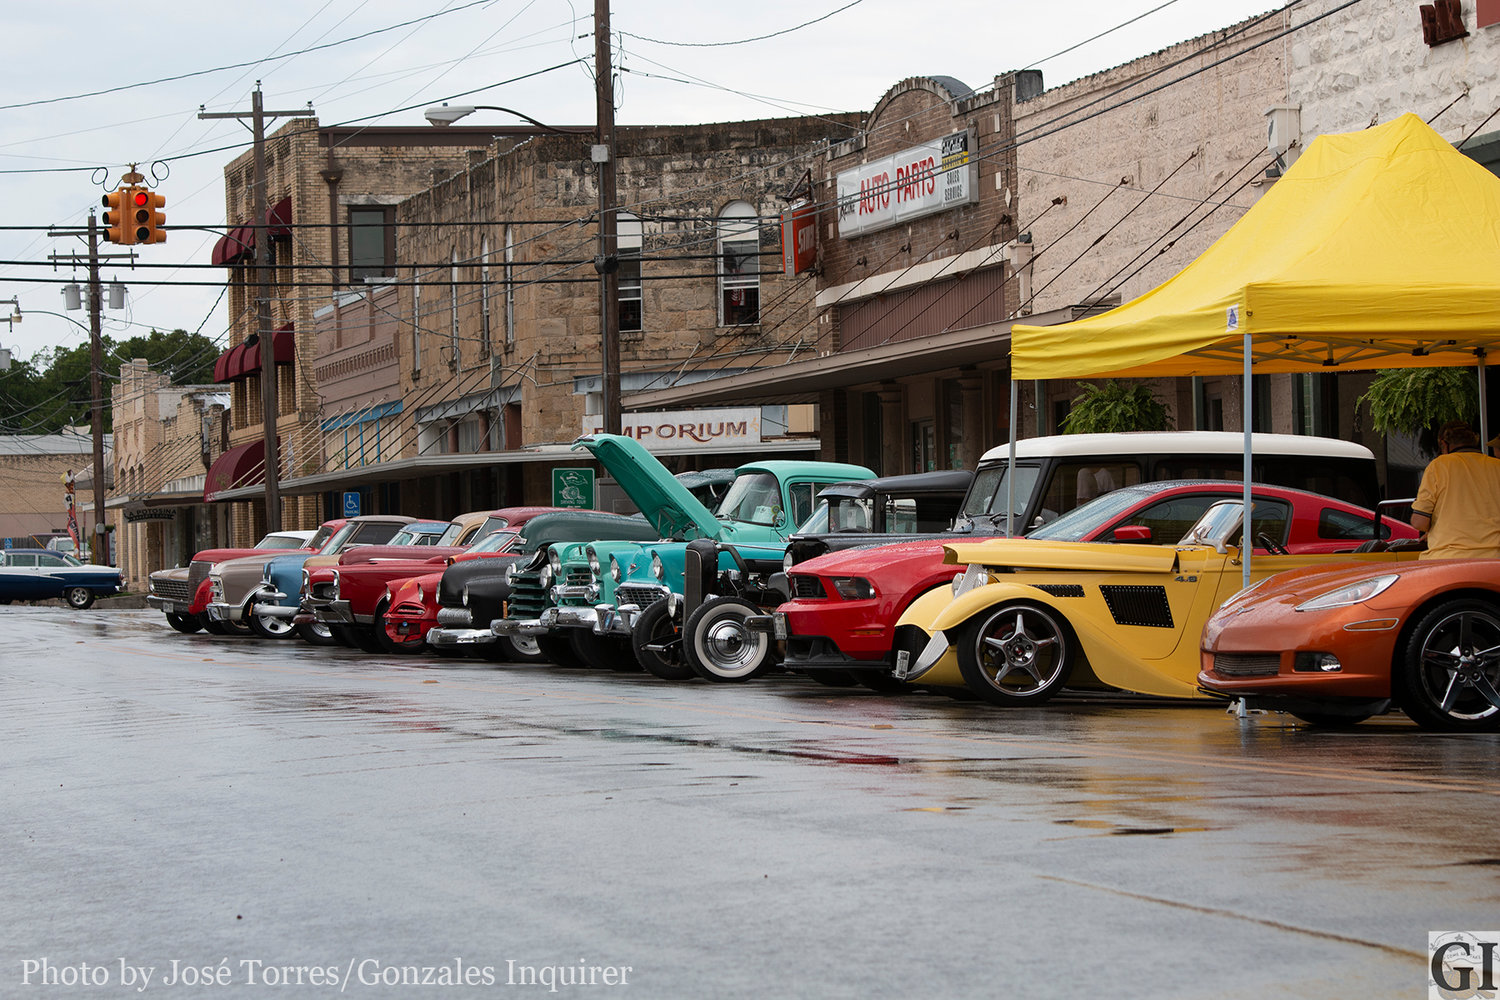 Gonzales last had a winter car show a few years ago, and they might again this February if city council agrees to spend $17,000 plus city services on the “Hot Rods and Hatters” car show currently held in Lockhart. The move would bring lots of visitors and “heads in beds,” organizers and officials say.